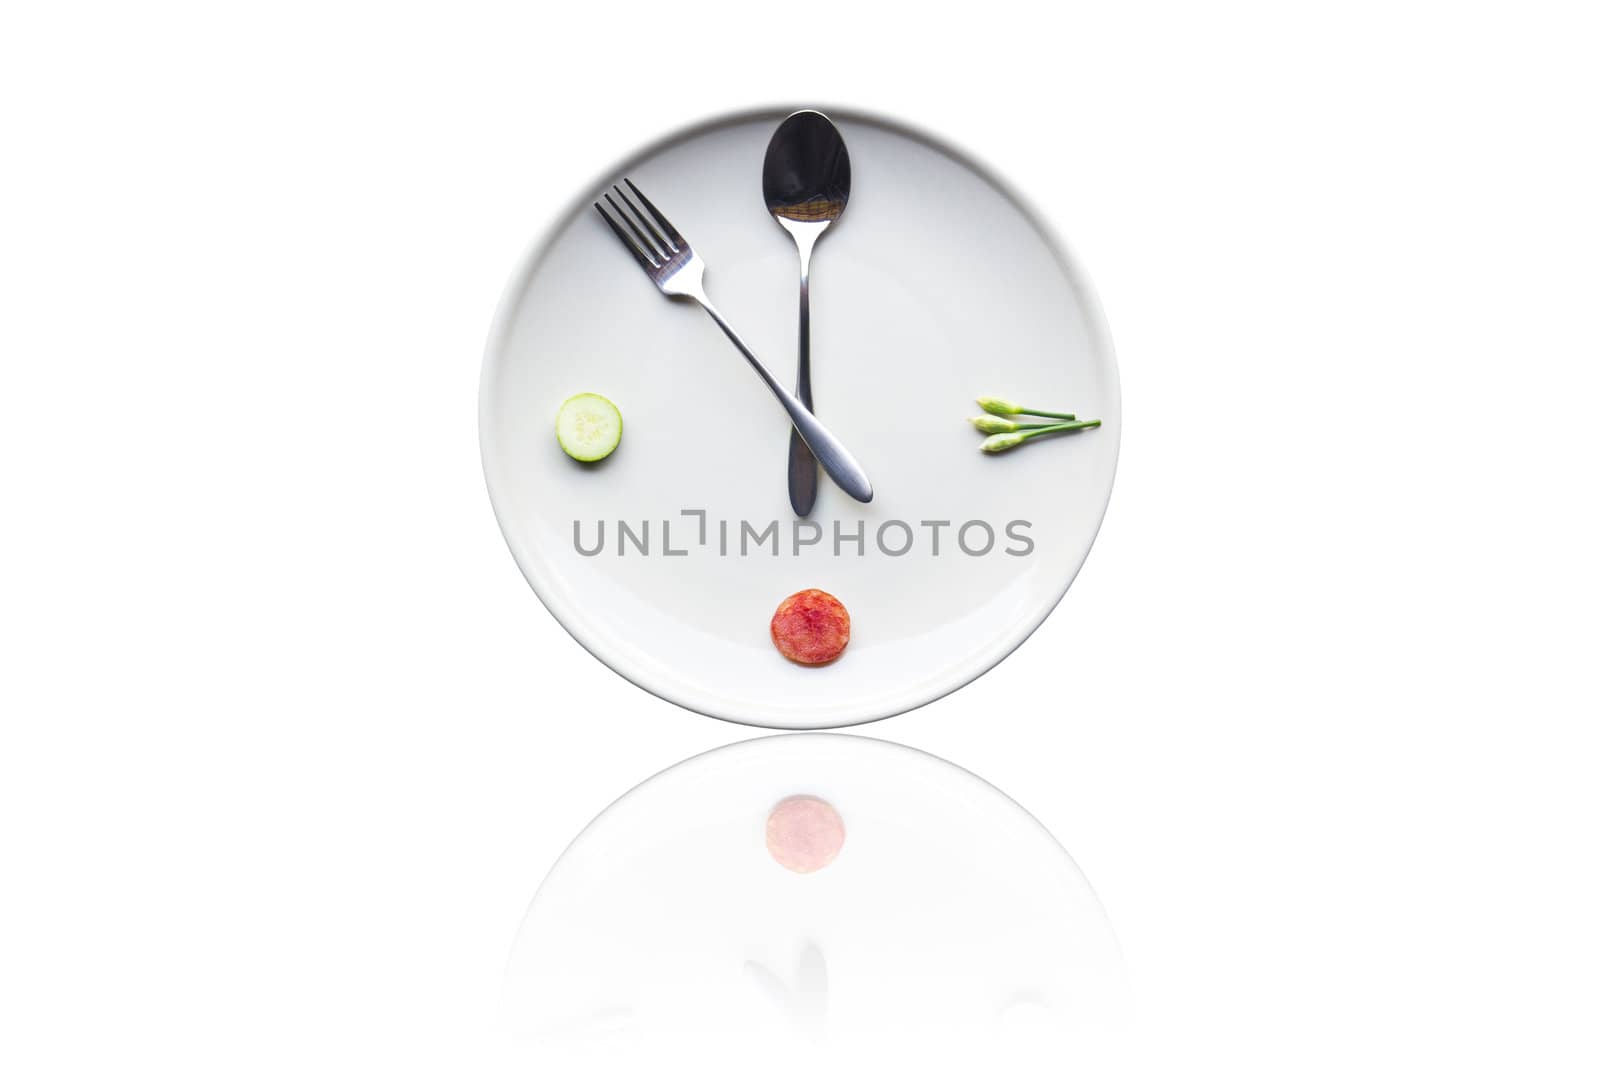 It's time for lunch.
Spoon and fork instead of the clock on the dinner plates.